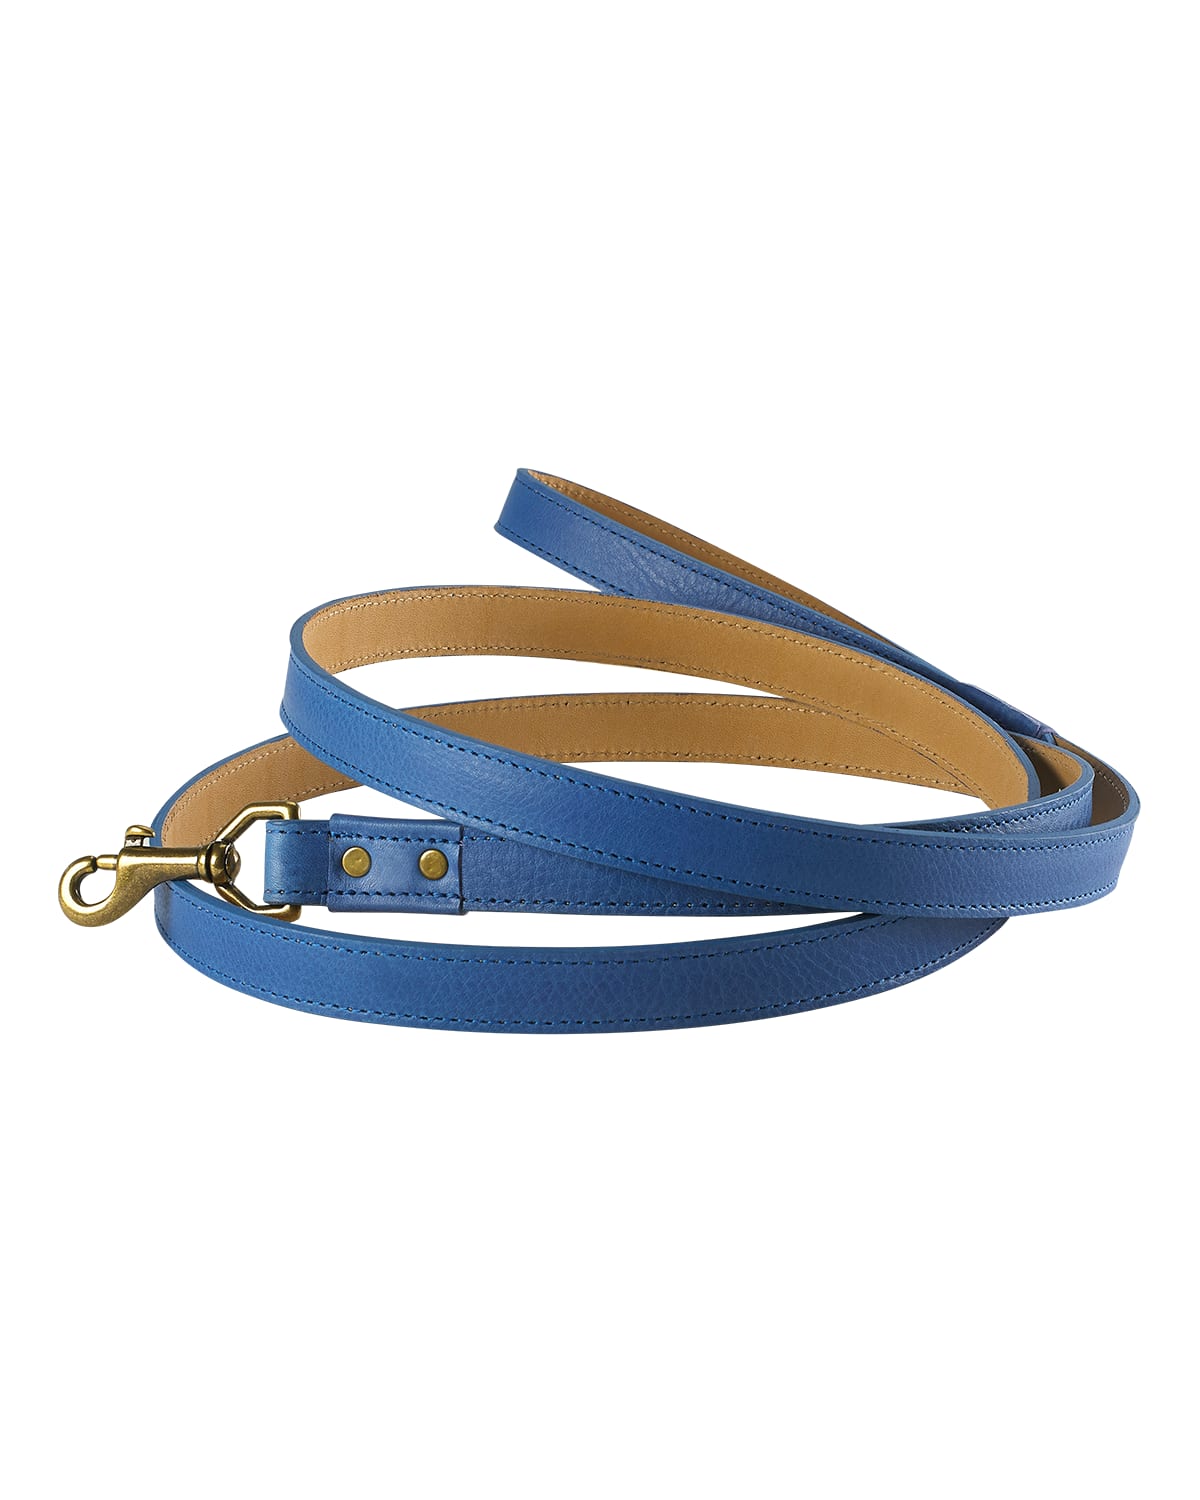 Shop Graphic Image Personalized Dog Leash In Blue